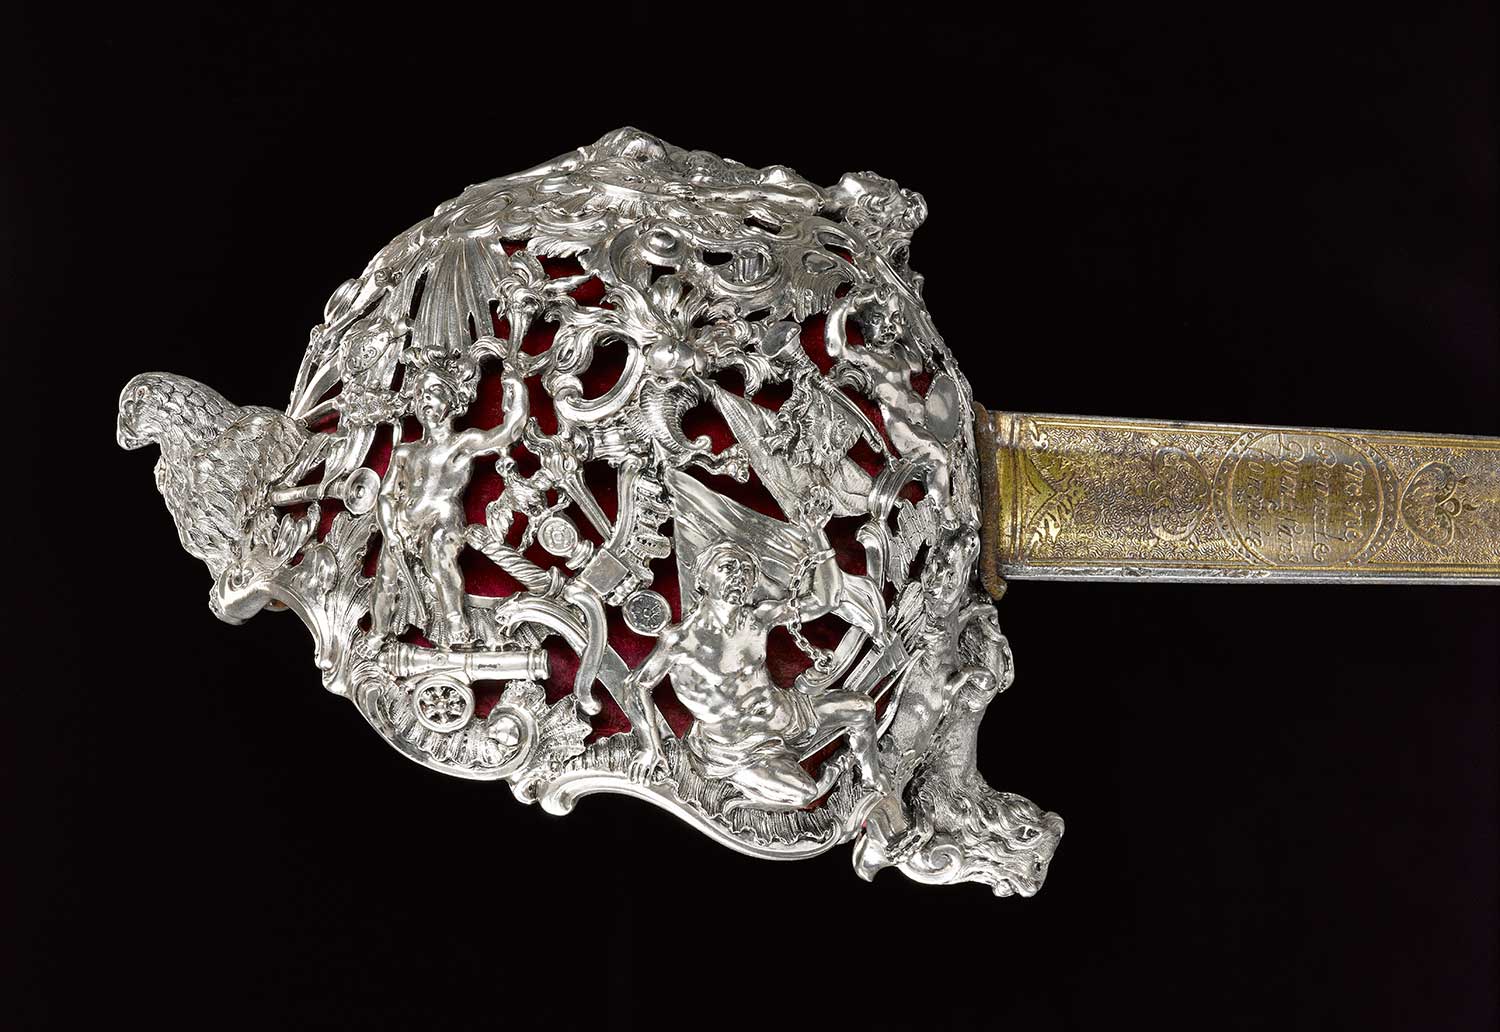 Backsword presented to Bonnie Prince Charlie by James, 3rd Duke of Perth, c.1740.